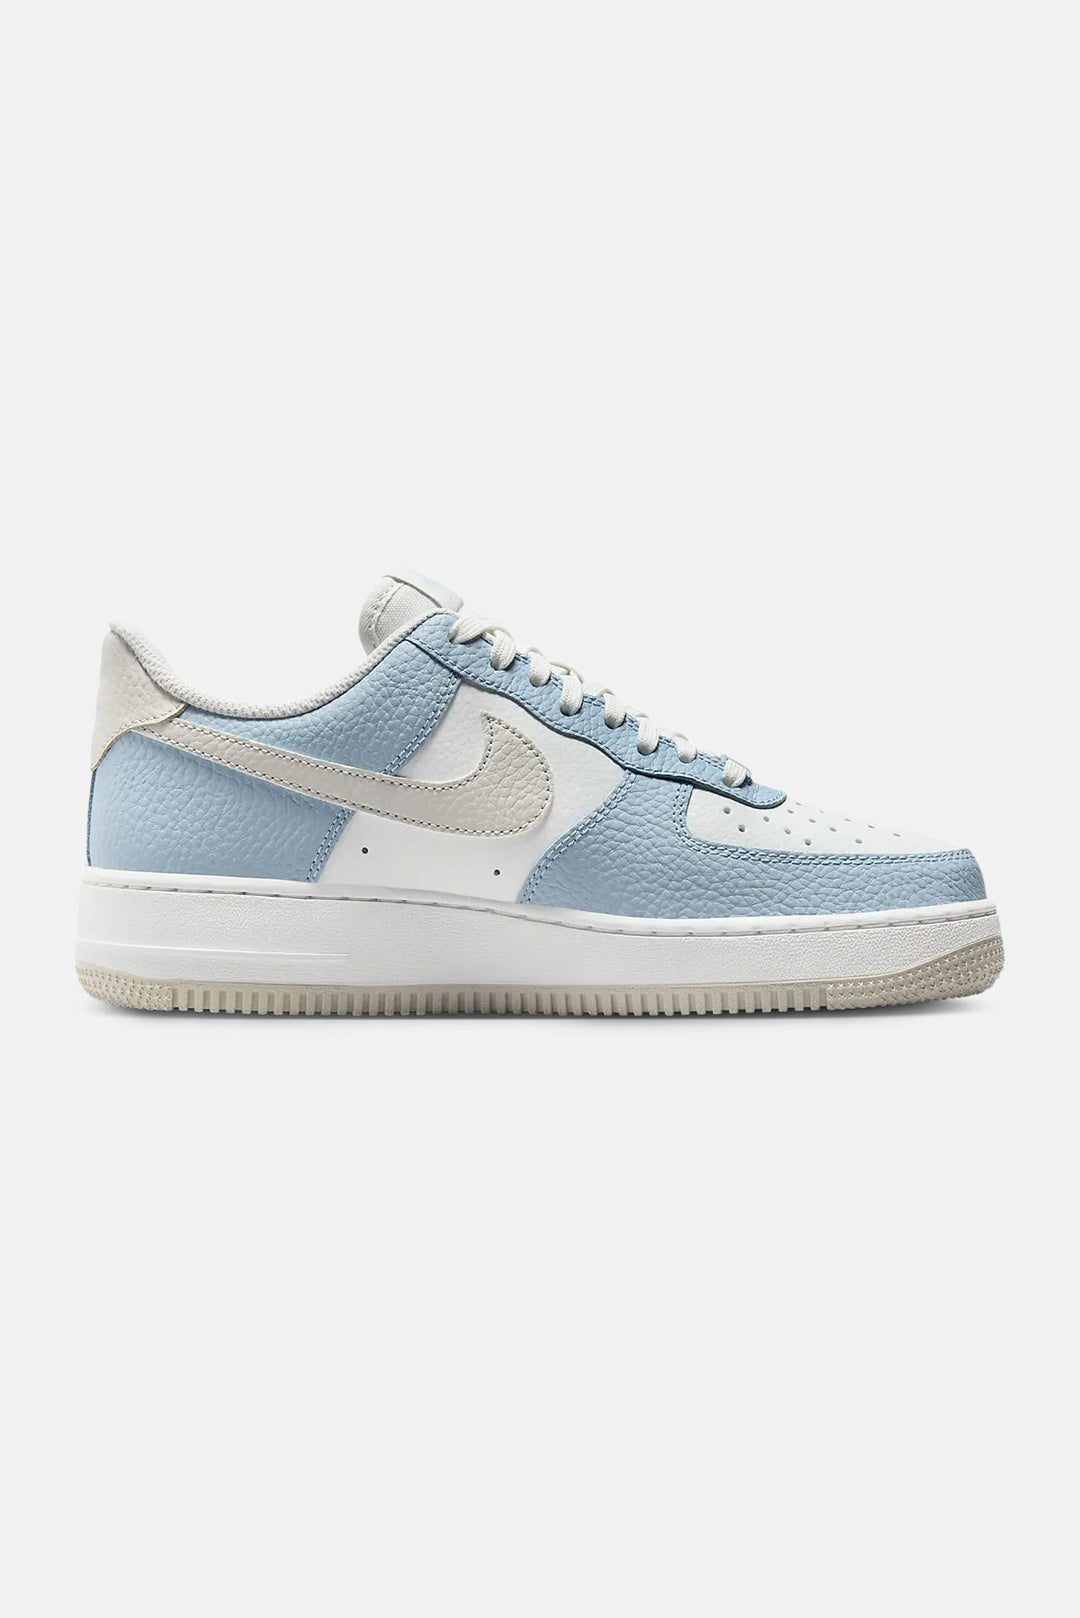 Women's Air Force 1 Low Light Armory Blue